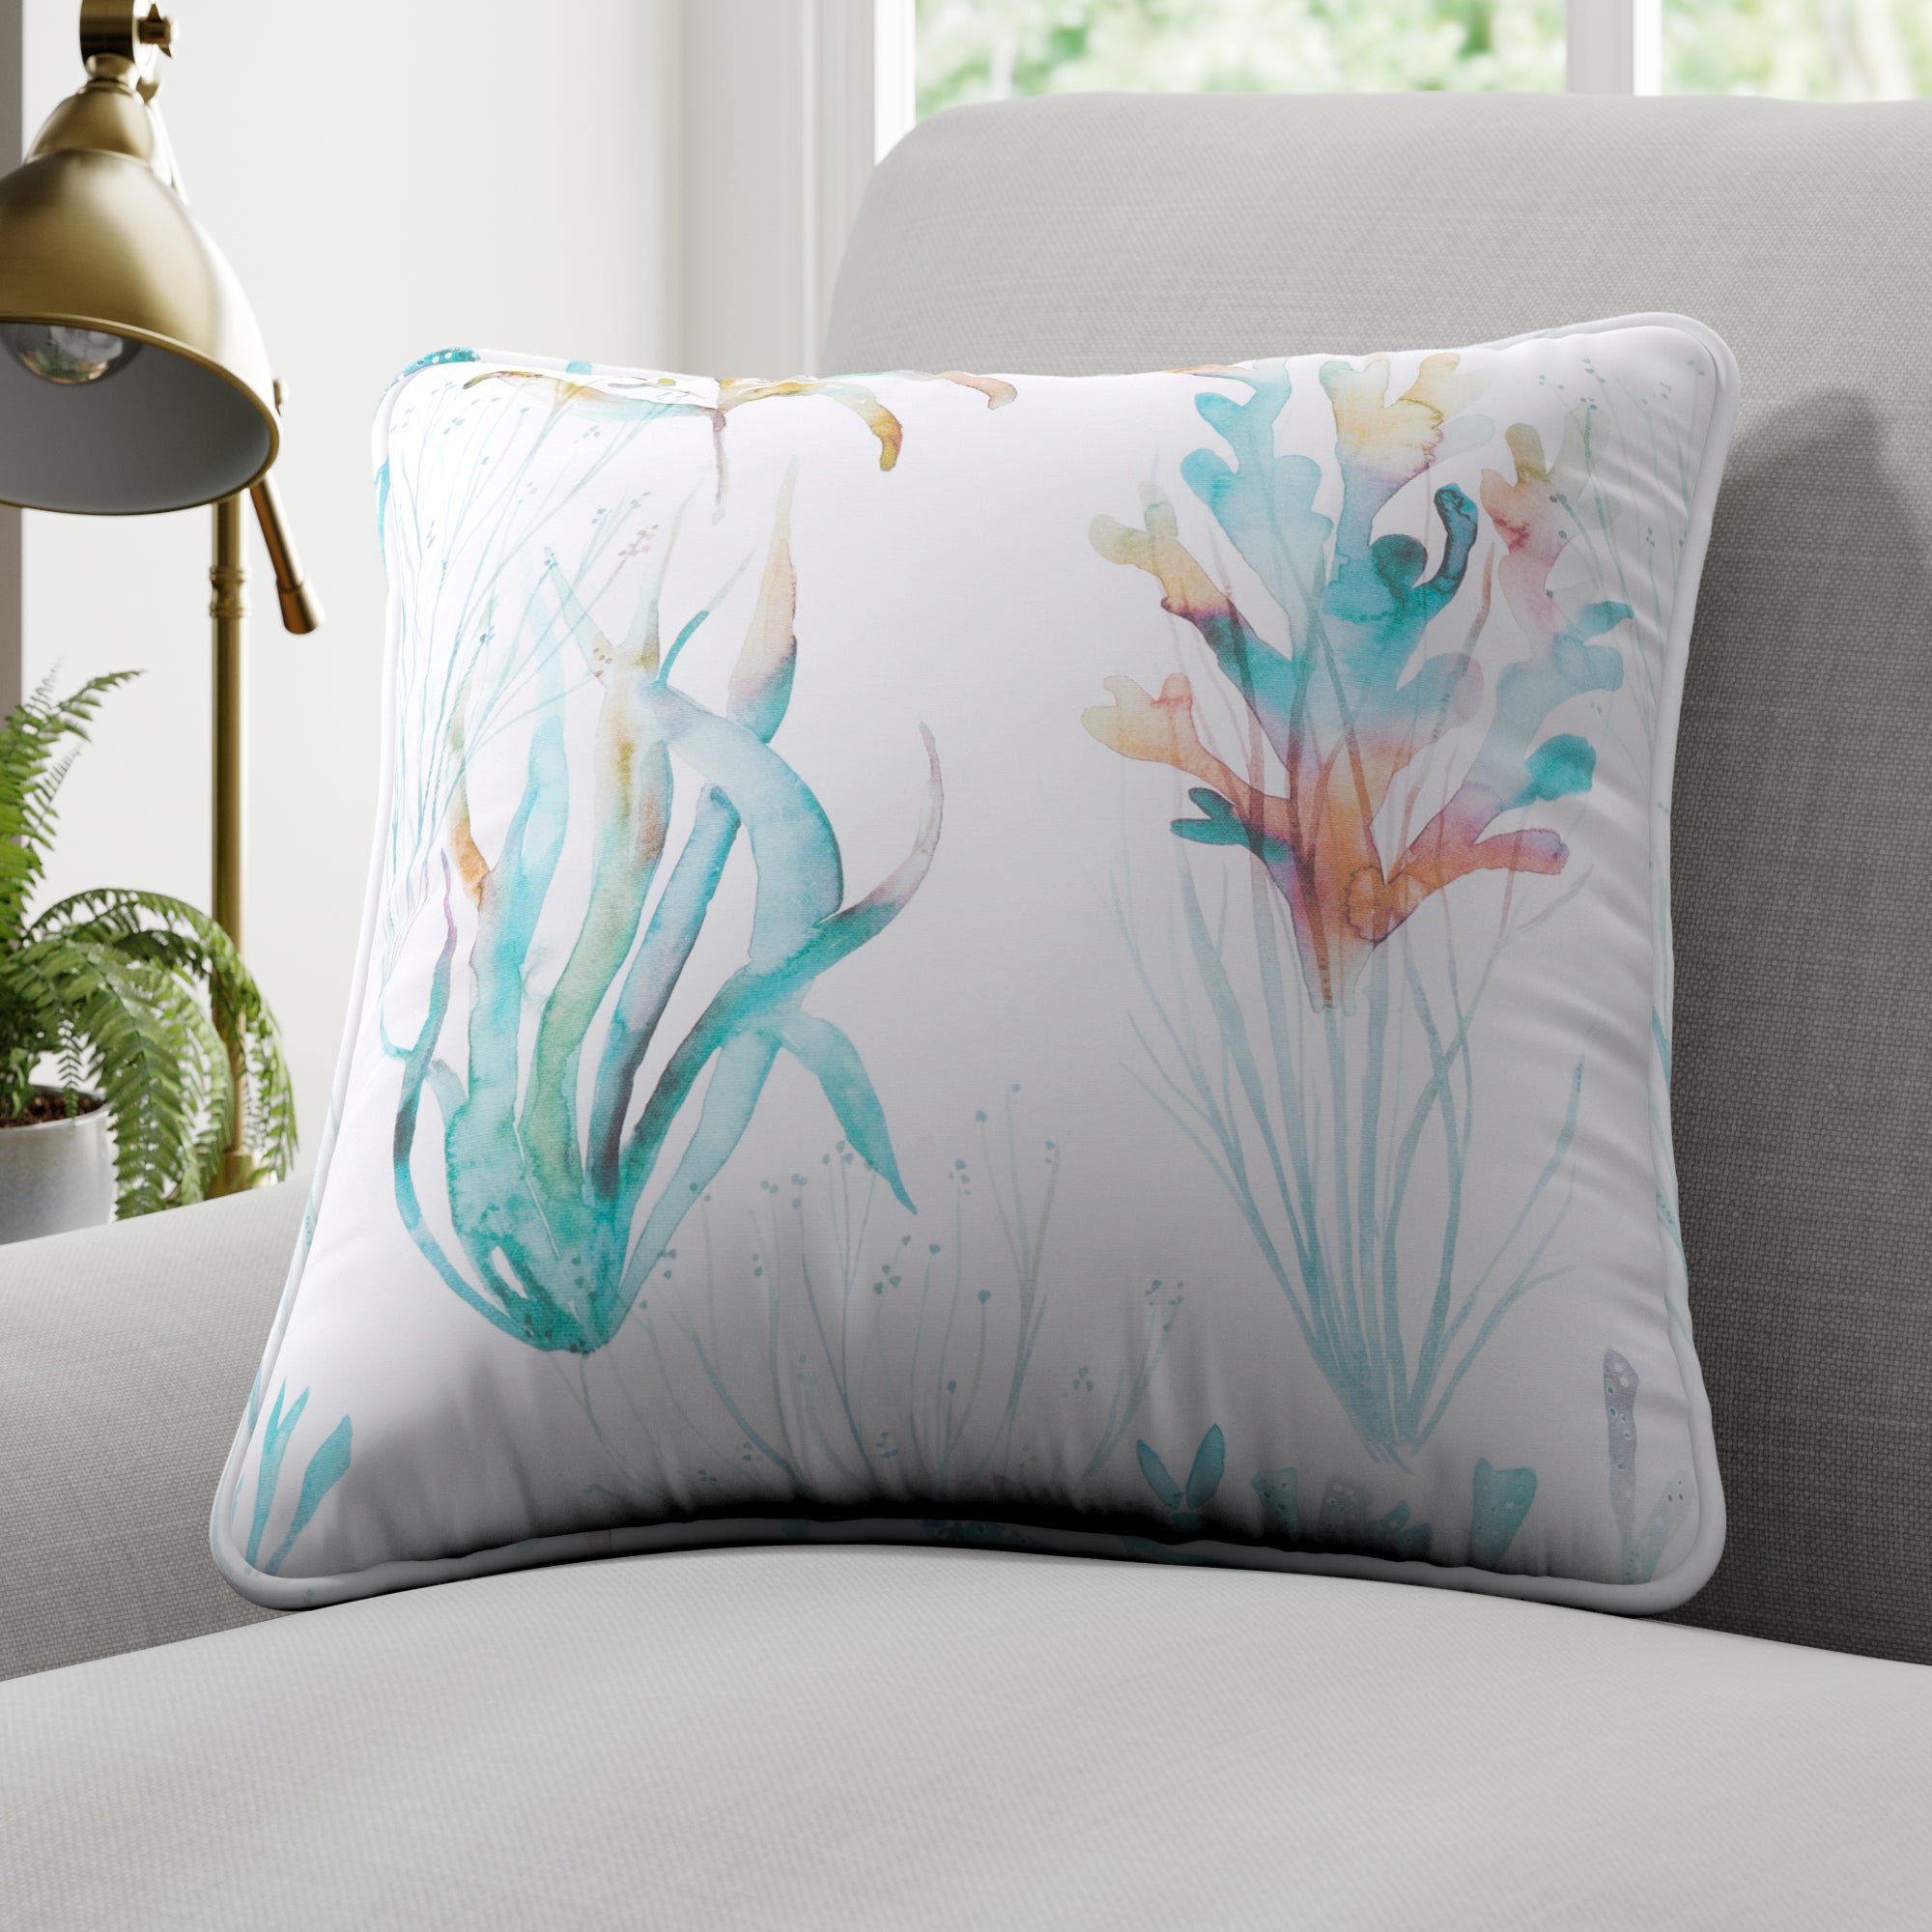 Coral Reef Made to Order Cushion Cover Coral Reef Kelpie